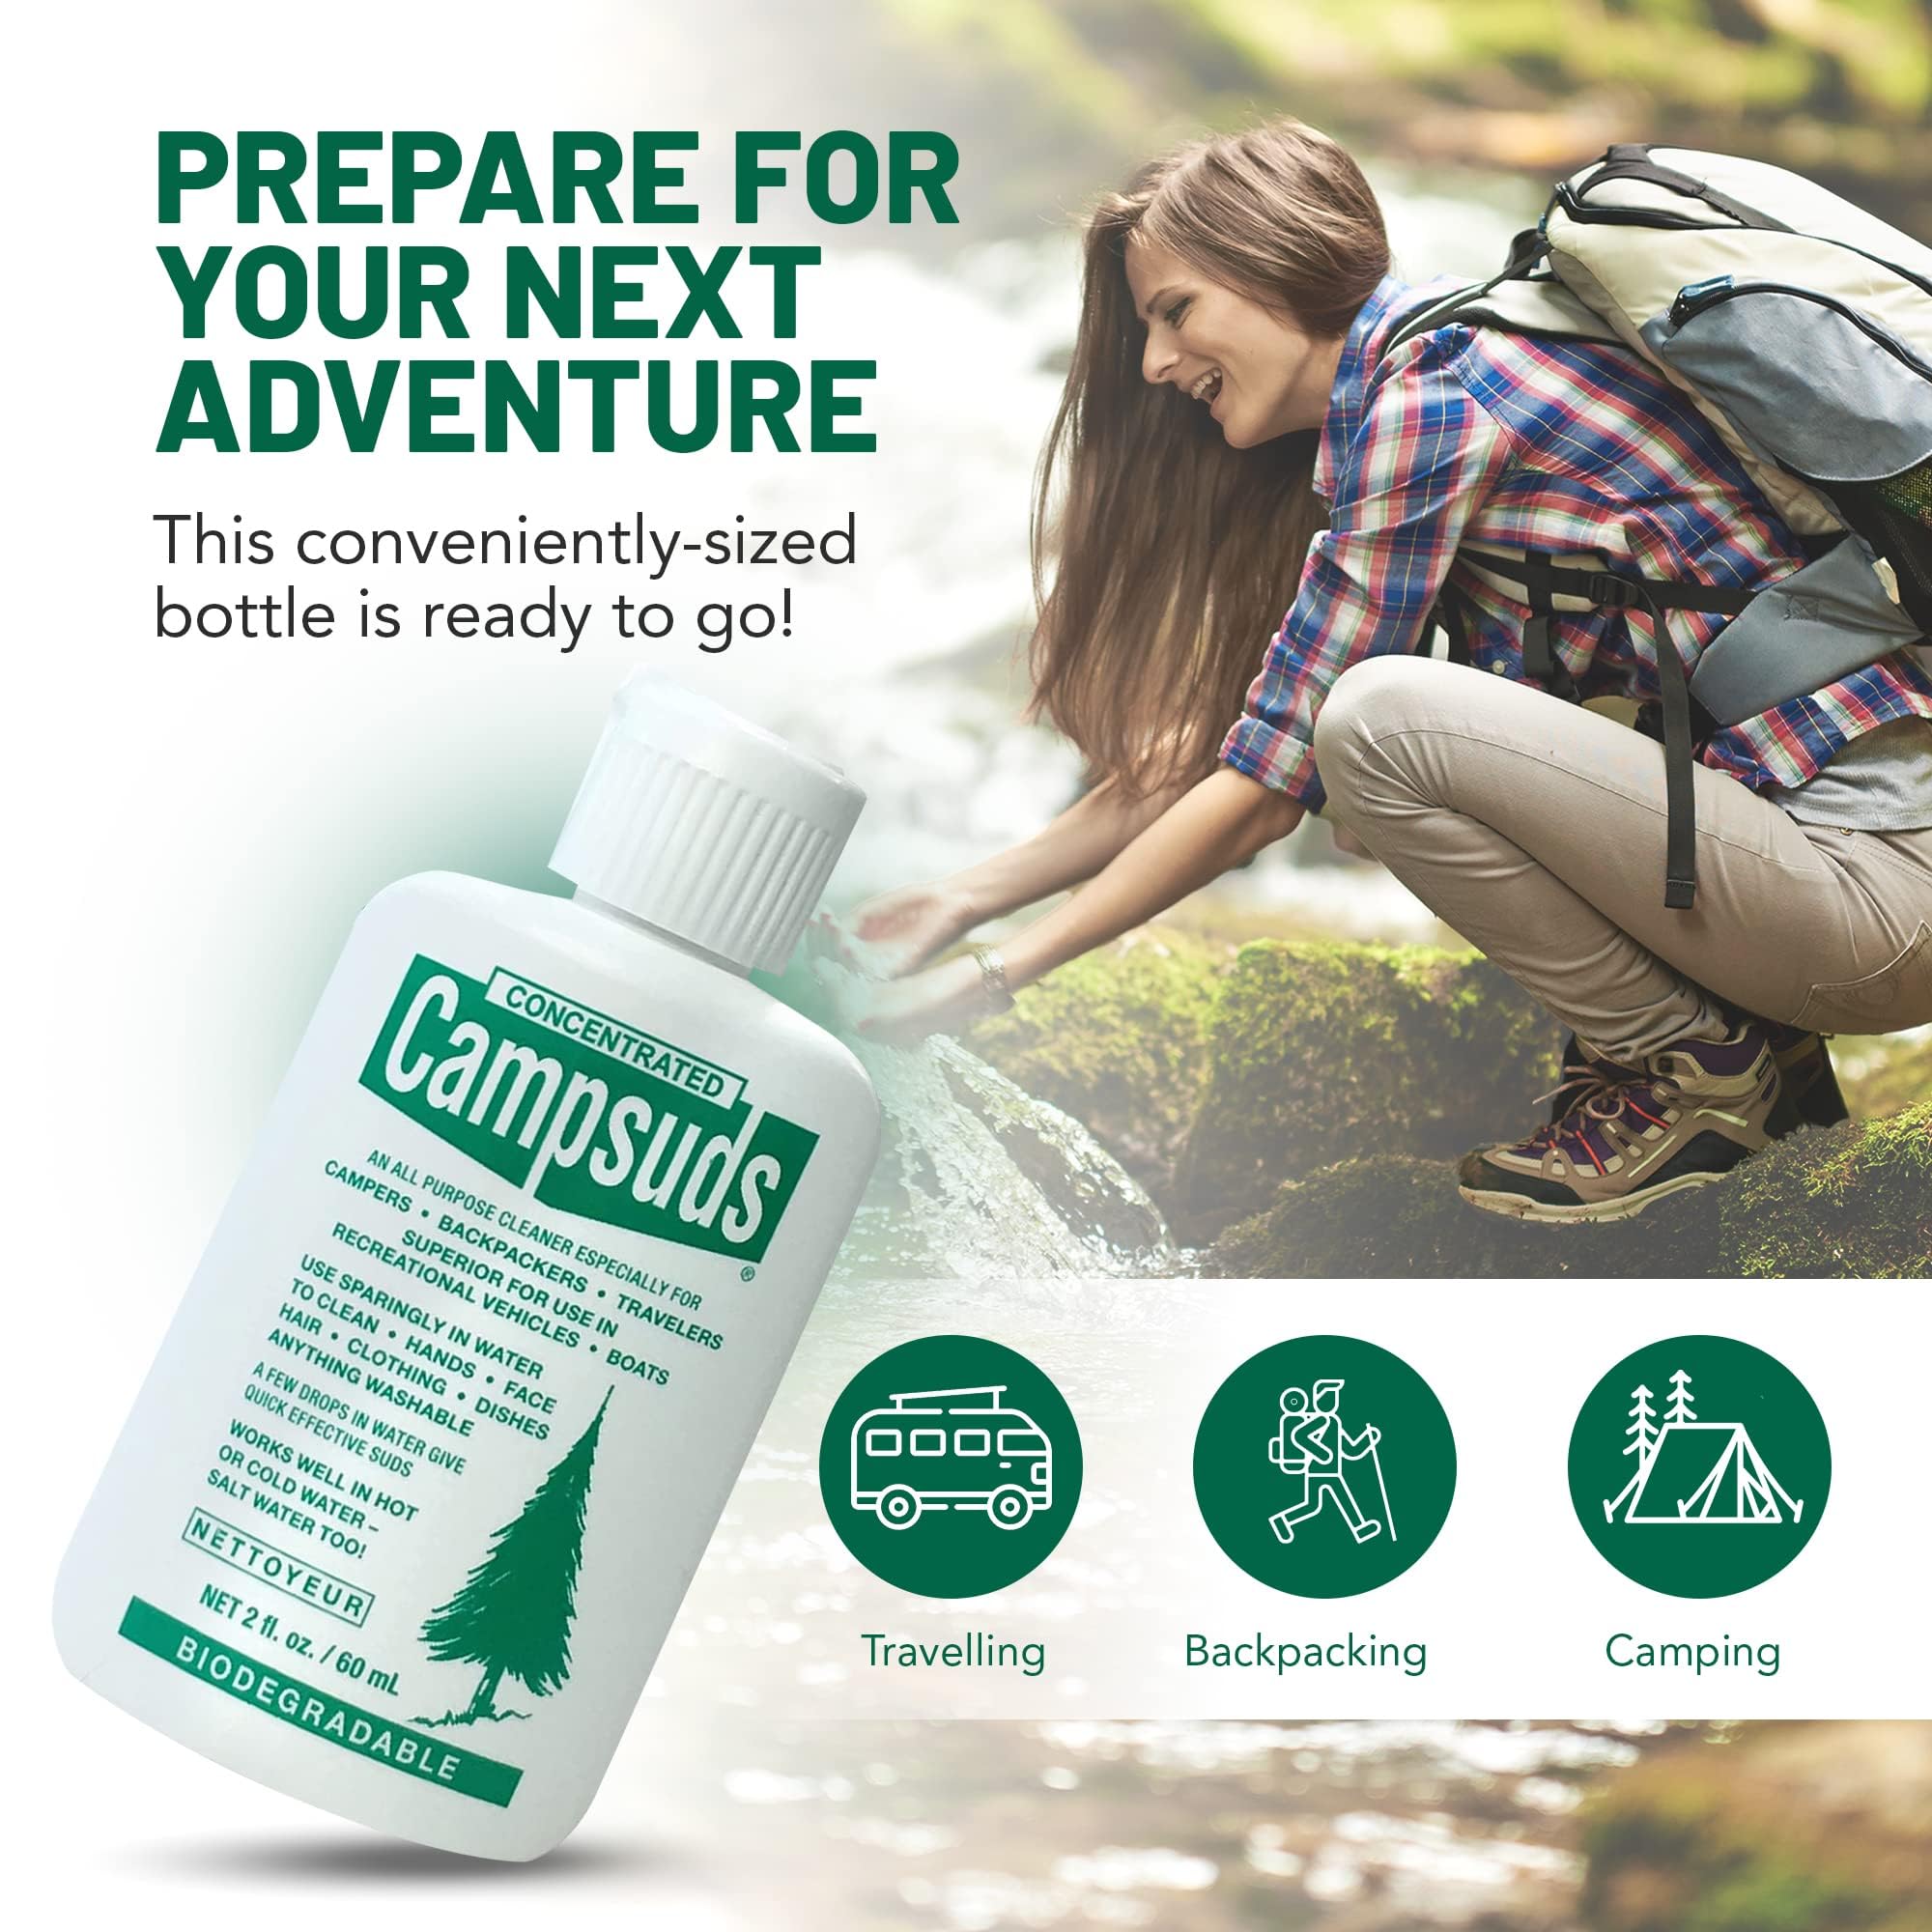 CONCENTRATED CAMPSUDS Outdoor Soap - Environmentally Conscious Camping Soap - Hiking & Camping Supplies - Camp Soap, Backpacking Soap, Travel Soap - Camping Gear Must Haves - 2 Fl Oz Bottle